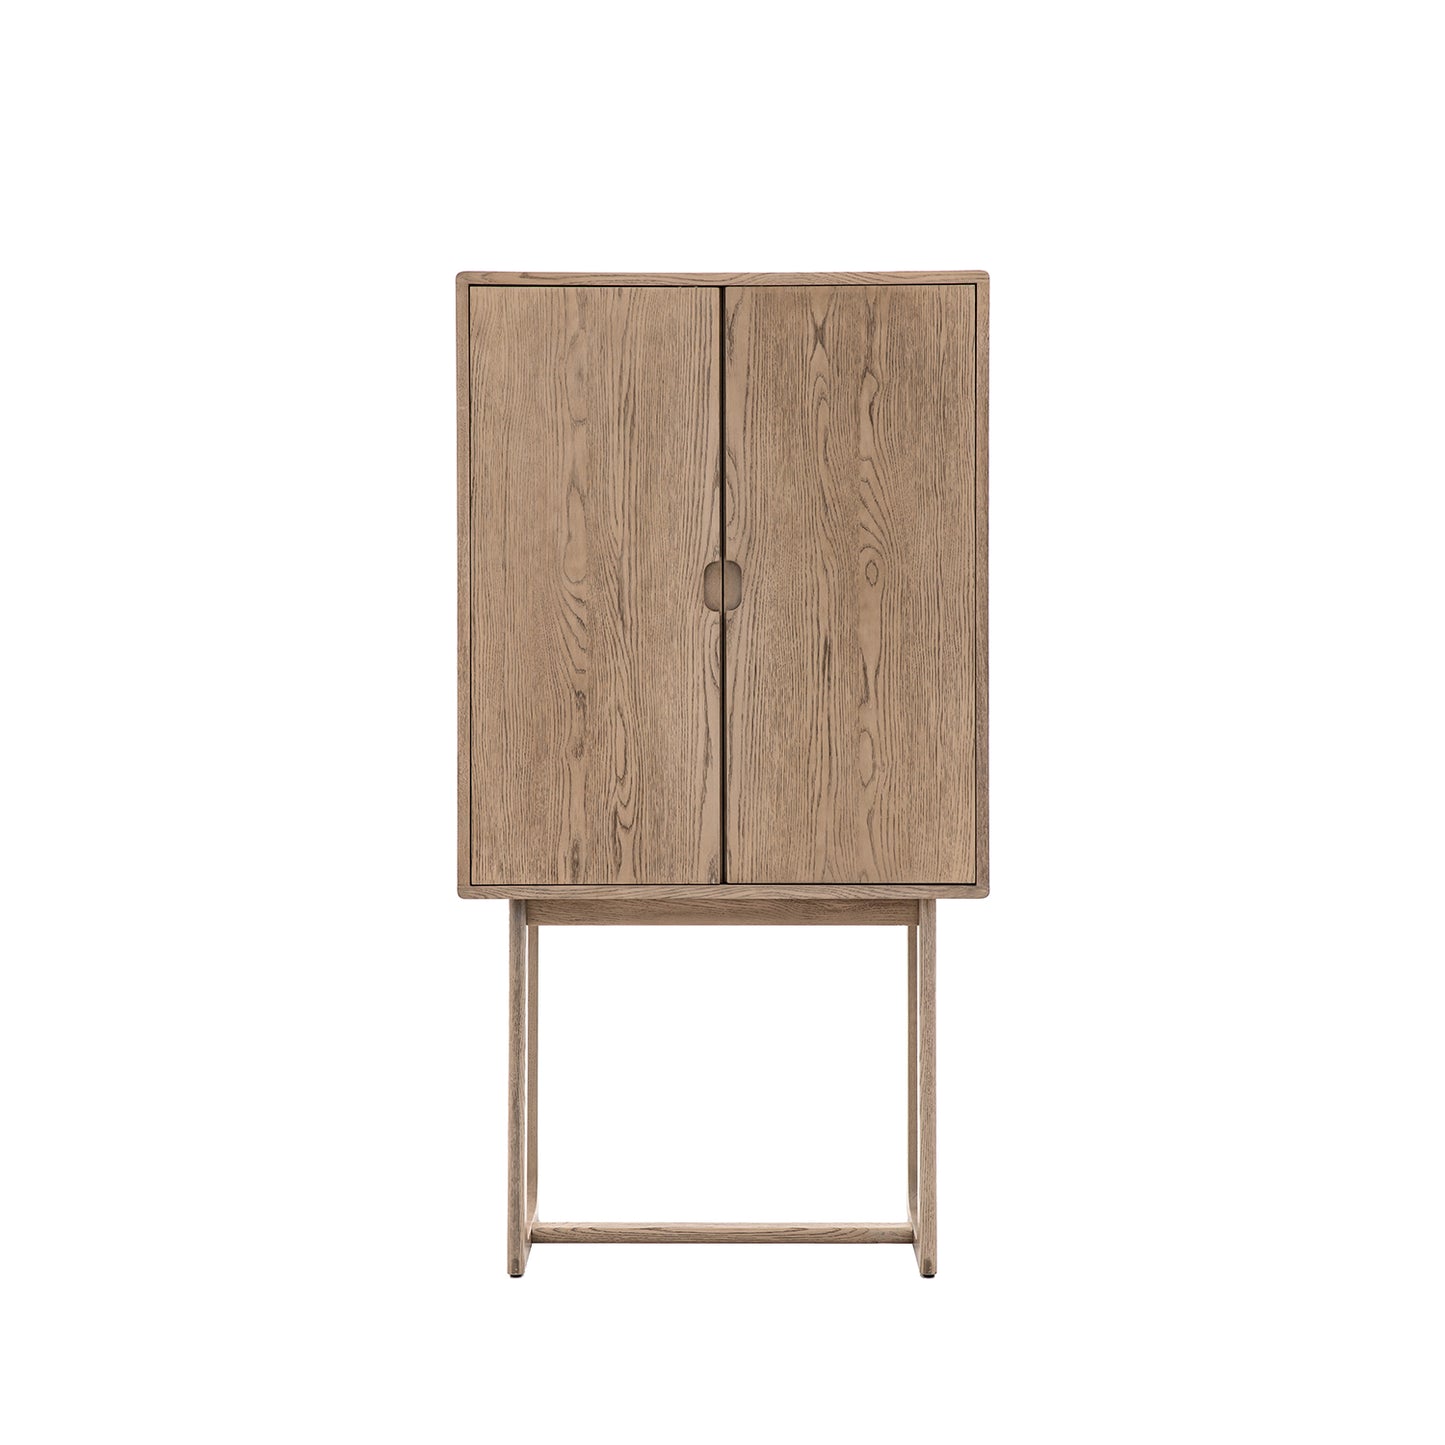 Maurice Cocktail Cabinet:- Smoked